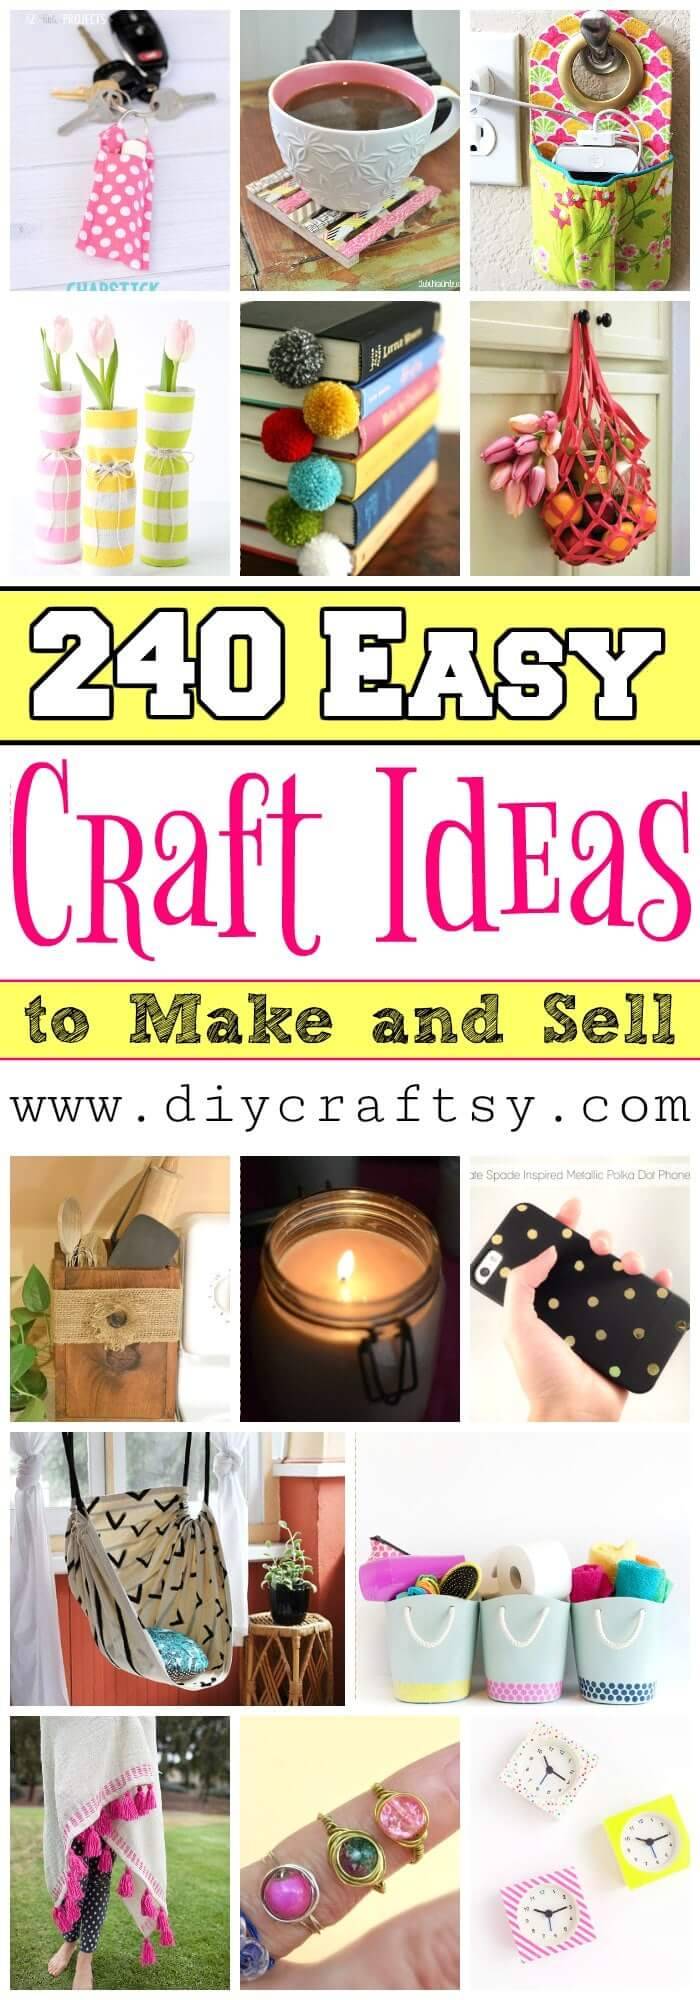 240 Easy Craft Ideas to Make and Sell - DIY & Crafts